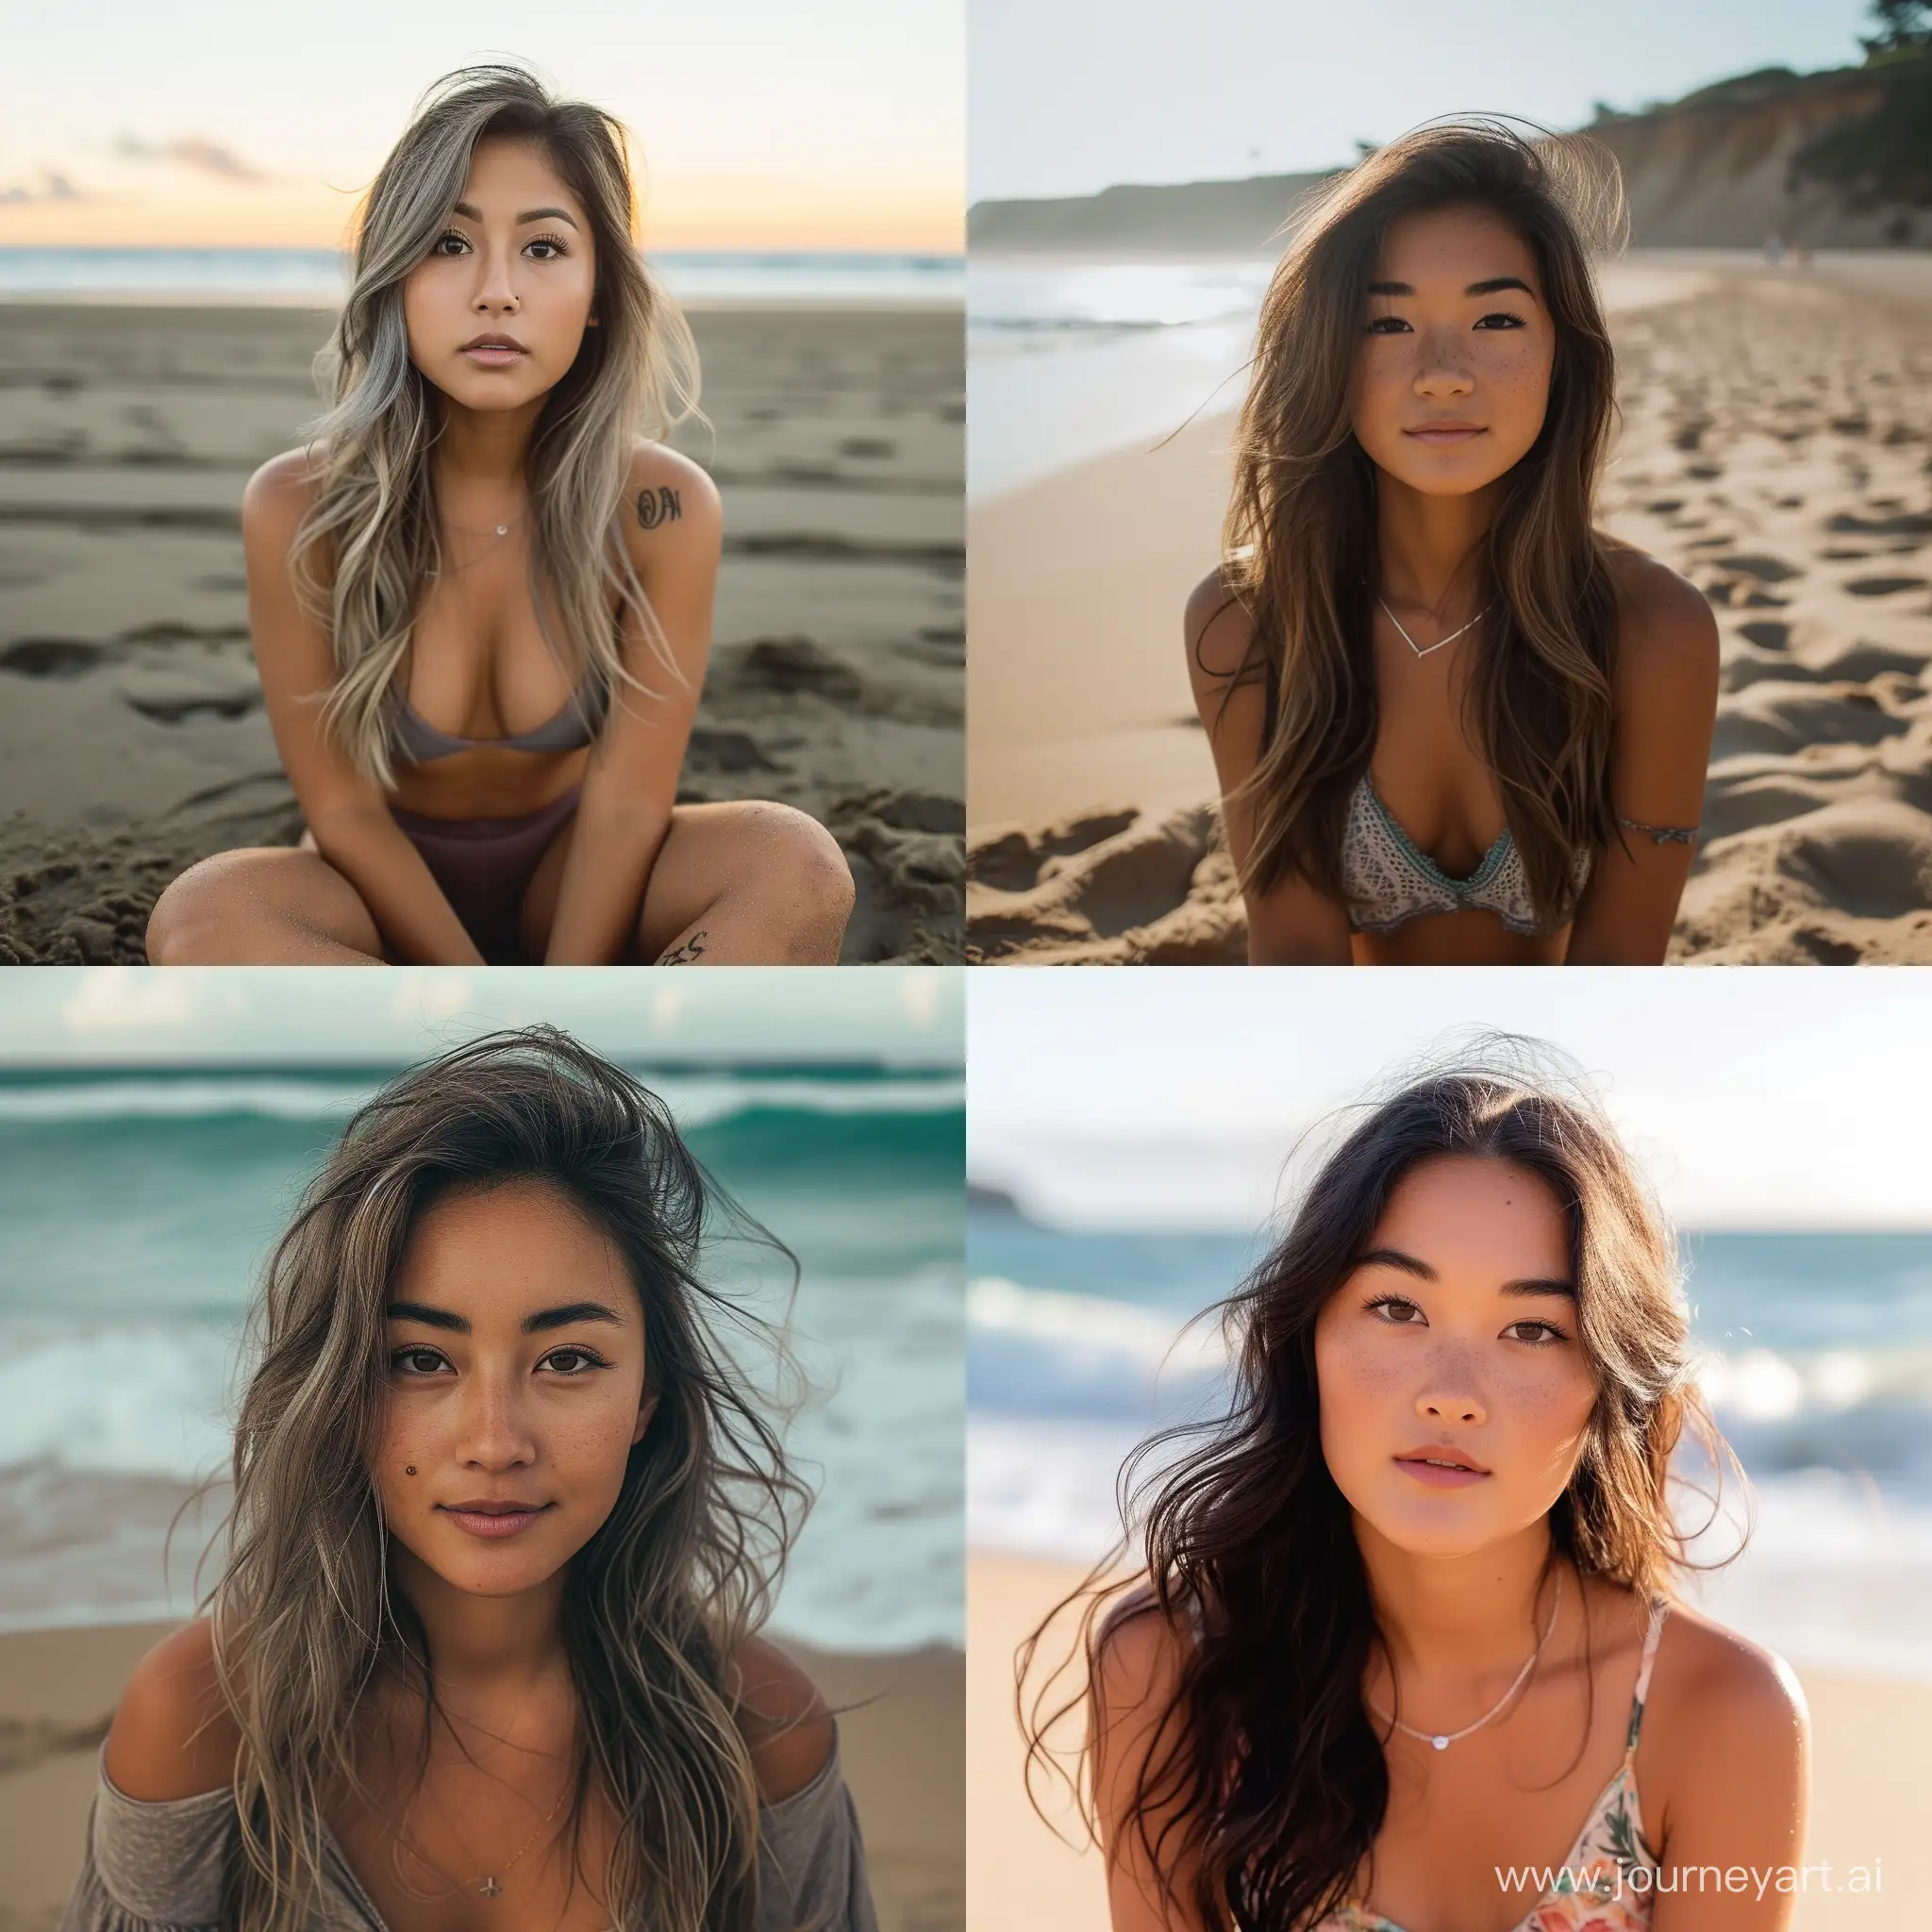 half asian half white 22 year old woman on the beach
